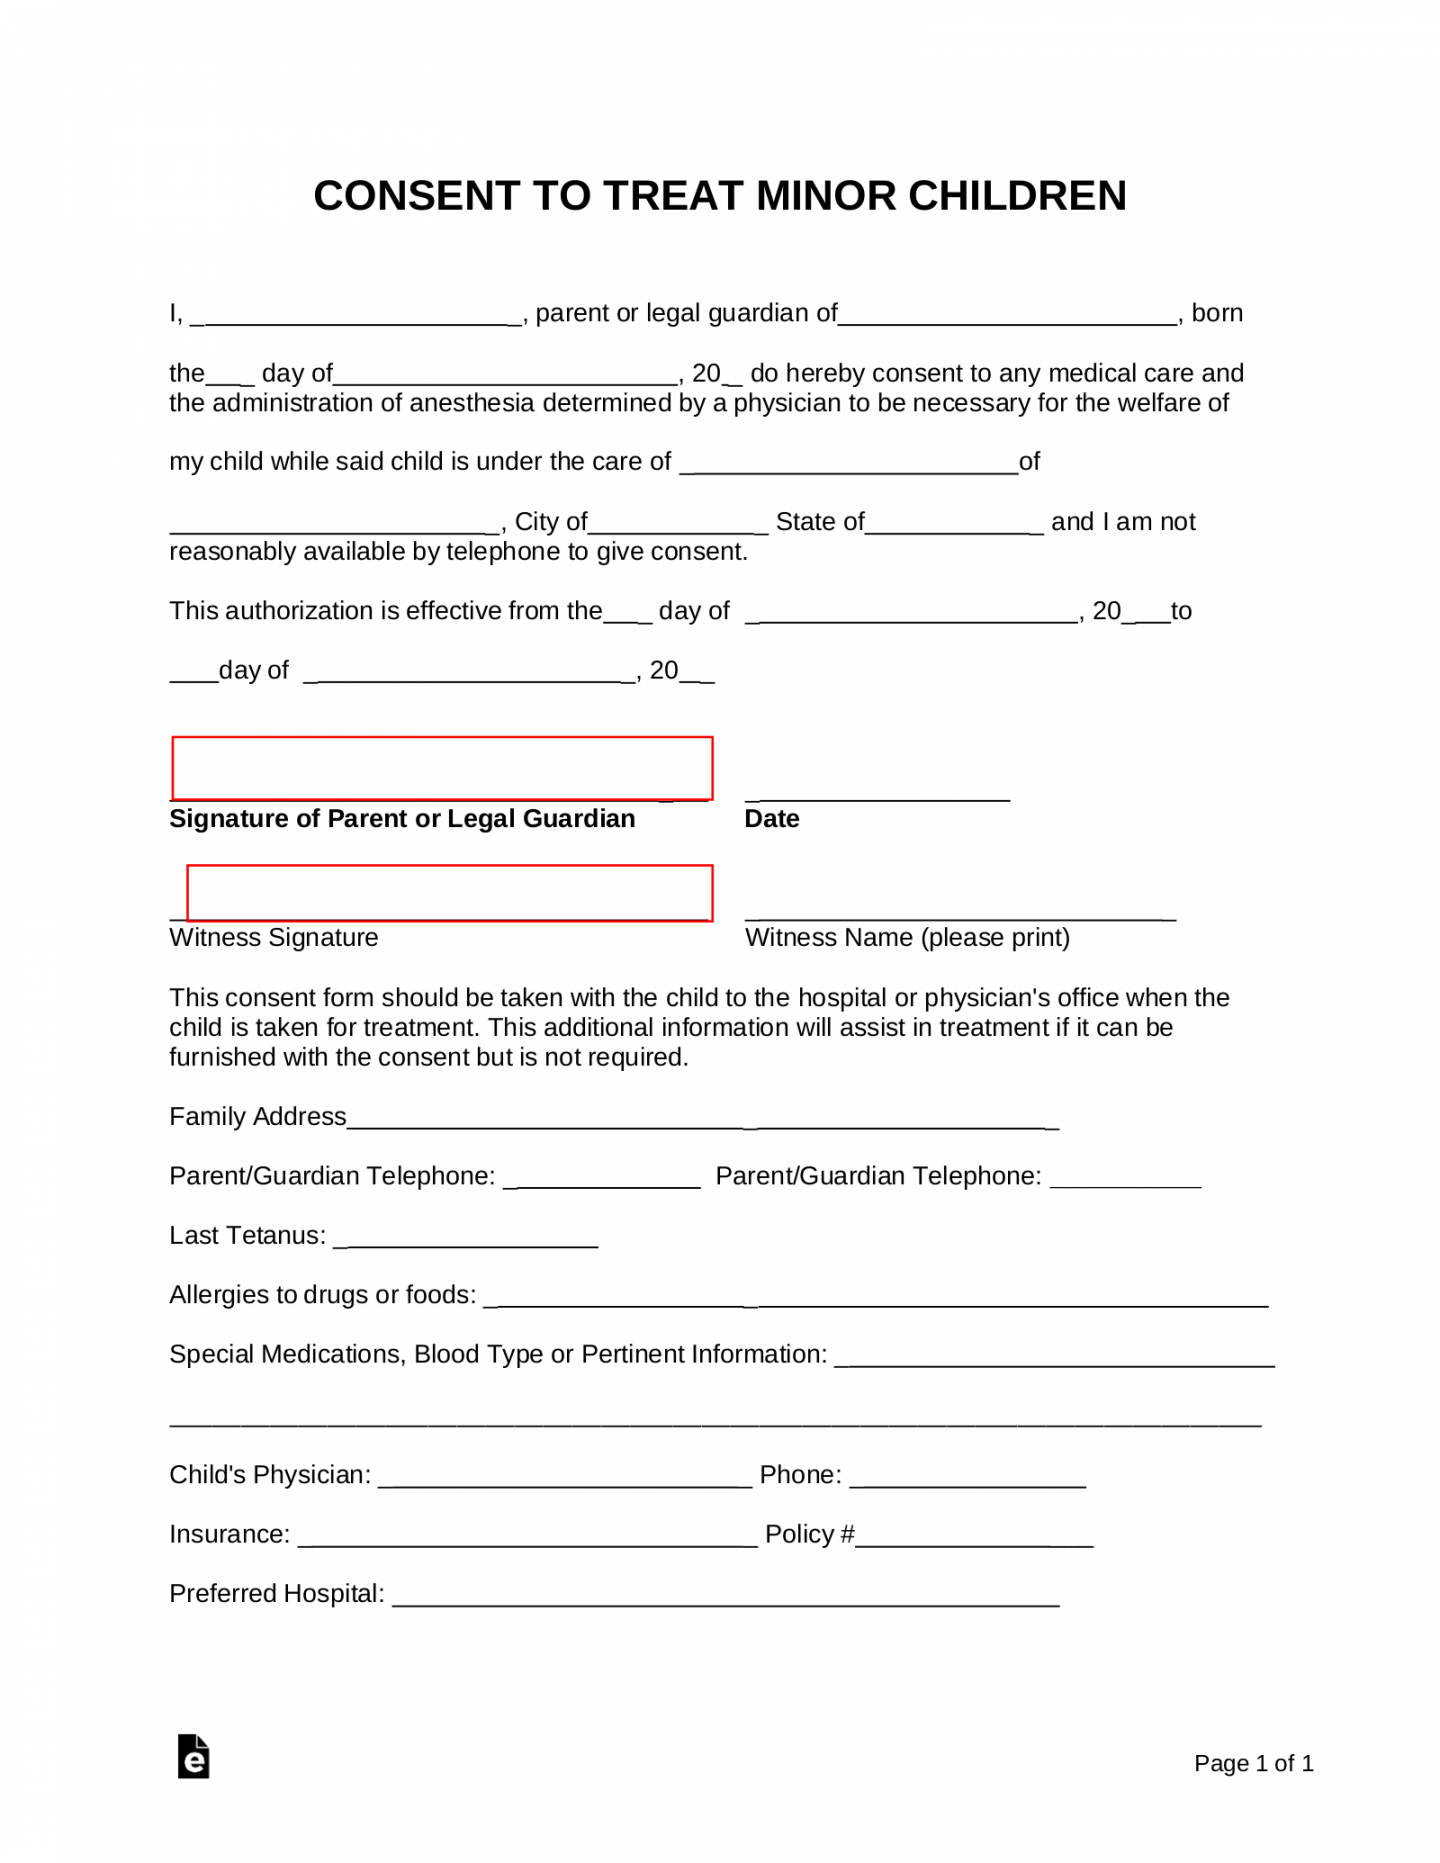 Free Minor (Child) Medical Consent Form - PDF  Word – eForms - FREE Printables - Free Printable Child Medical Consent Form For Grandparents